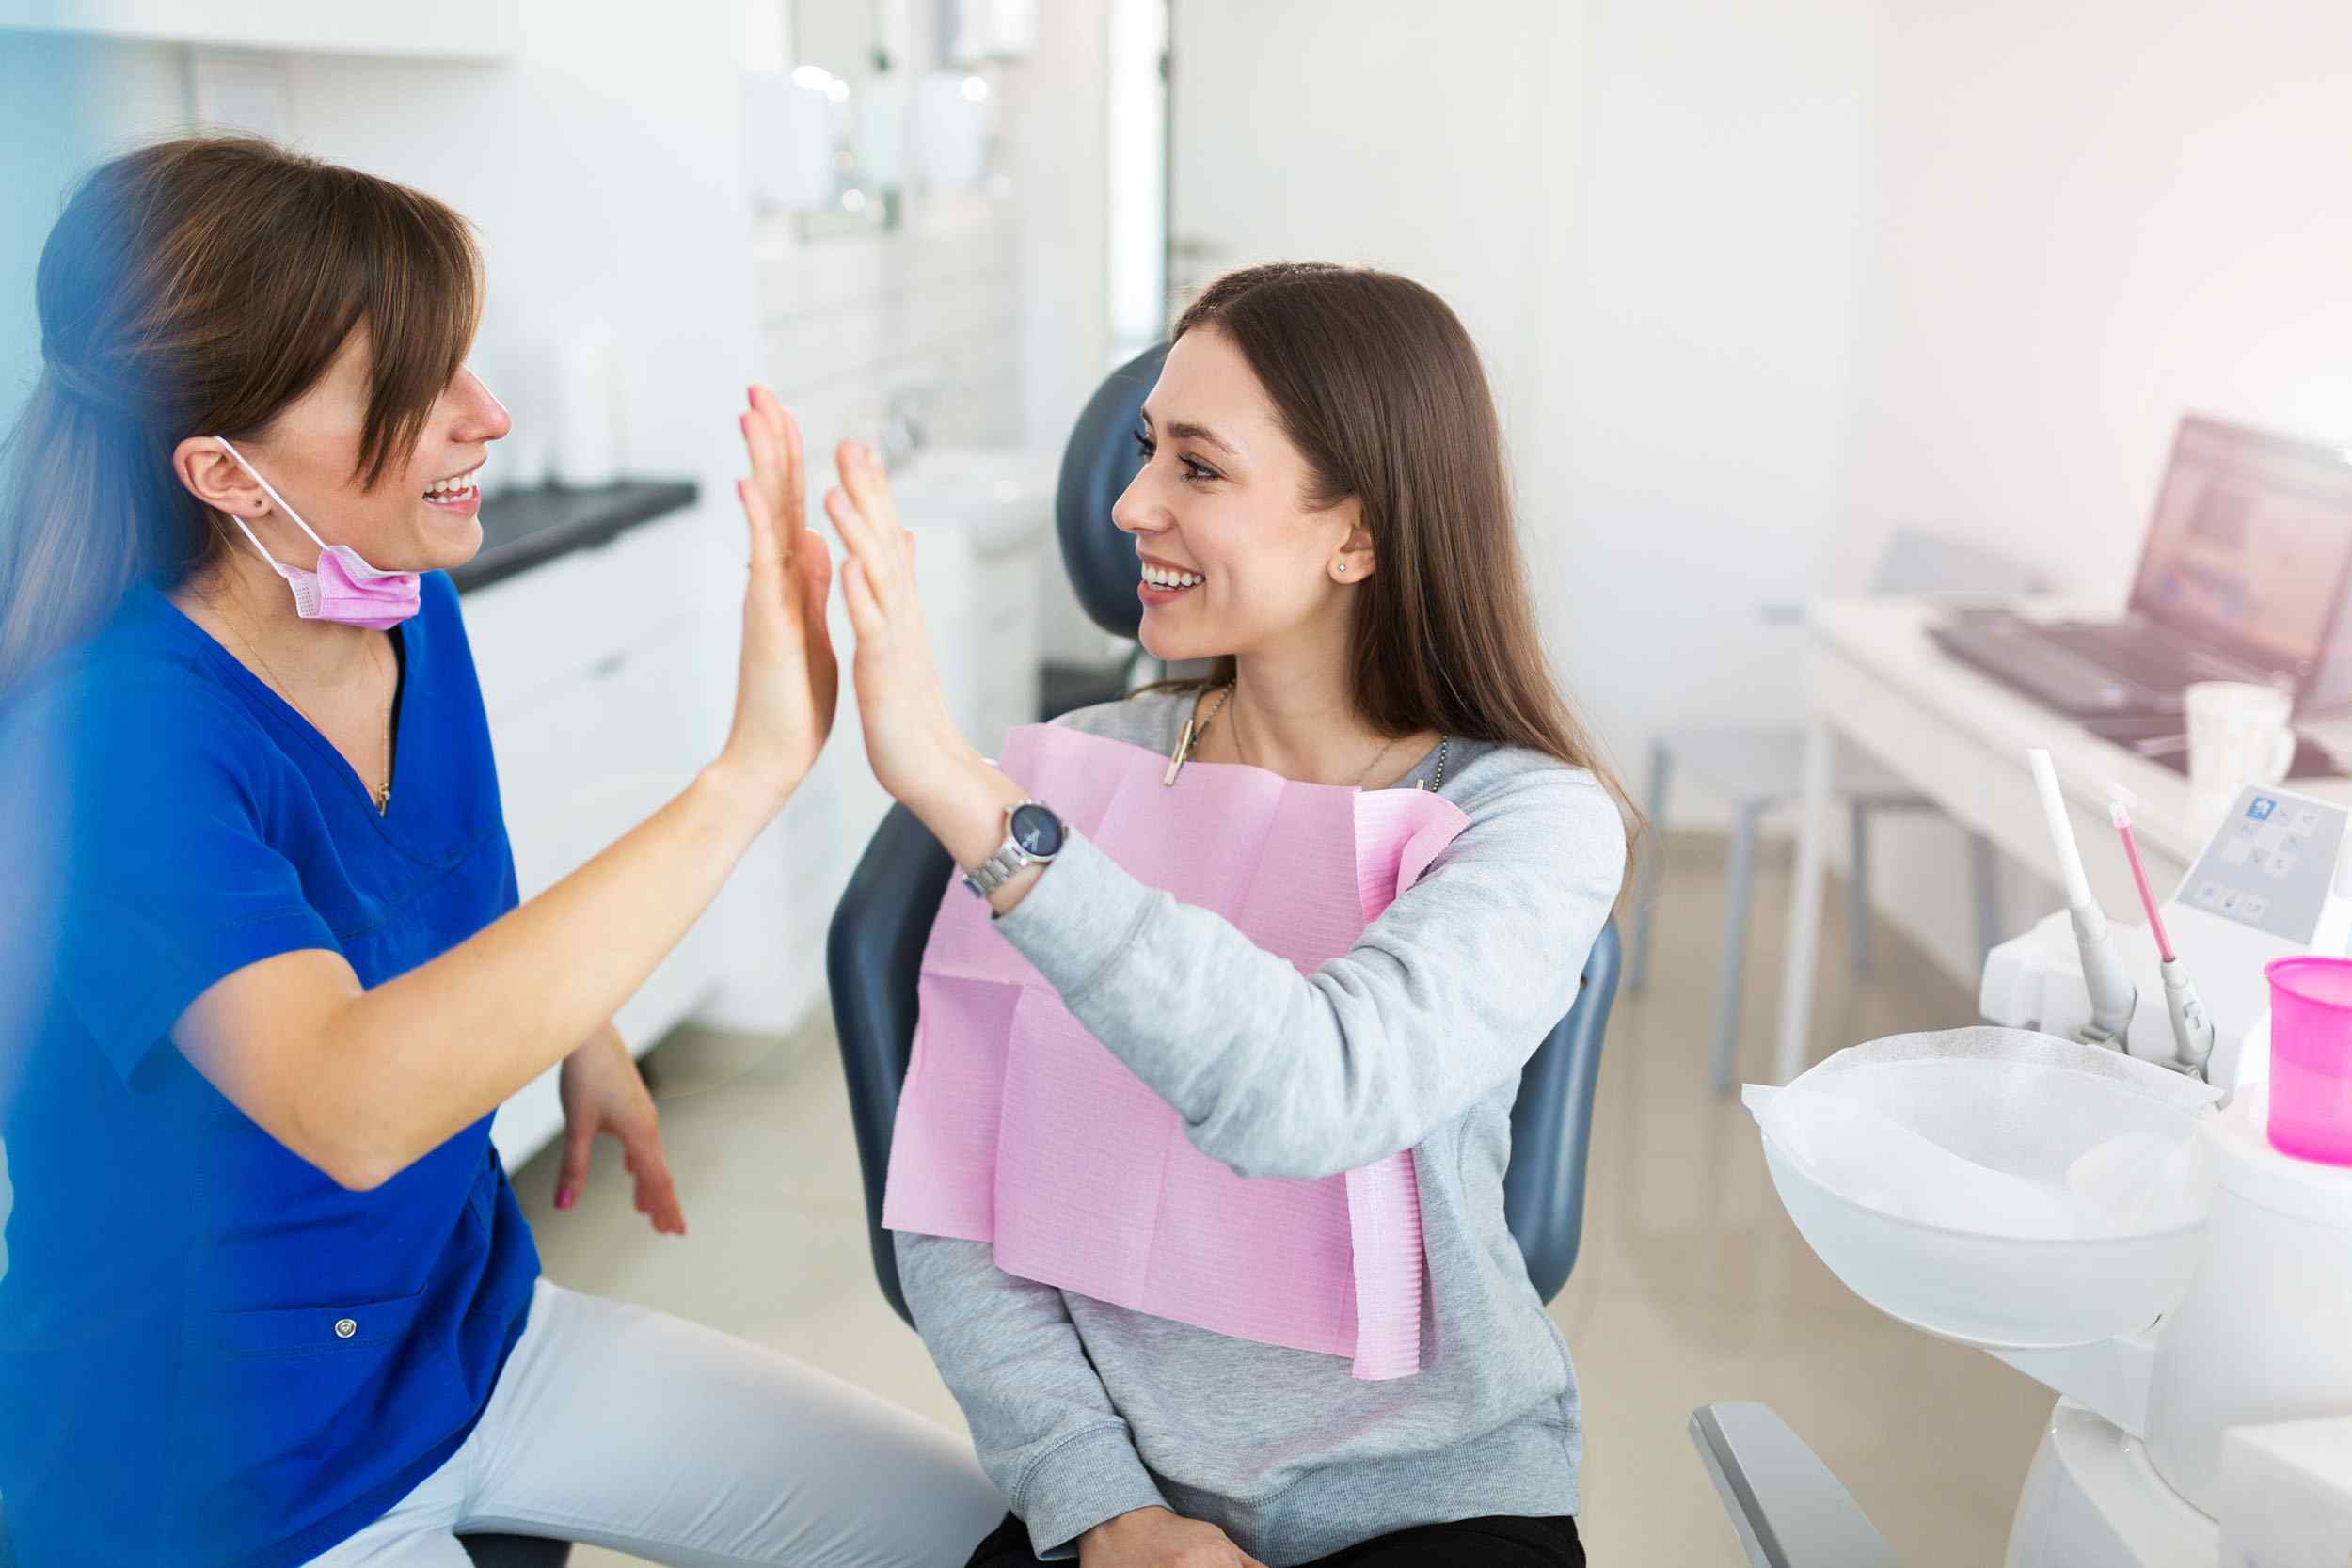 Two women giving each other a high five after treatment.